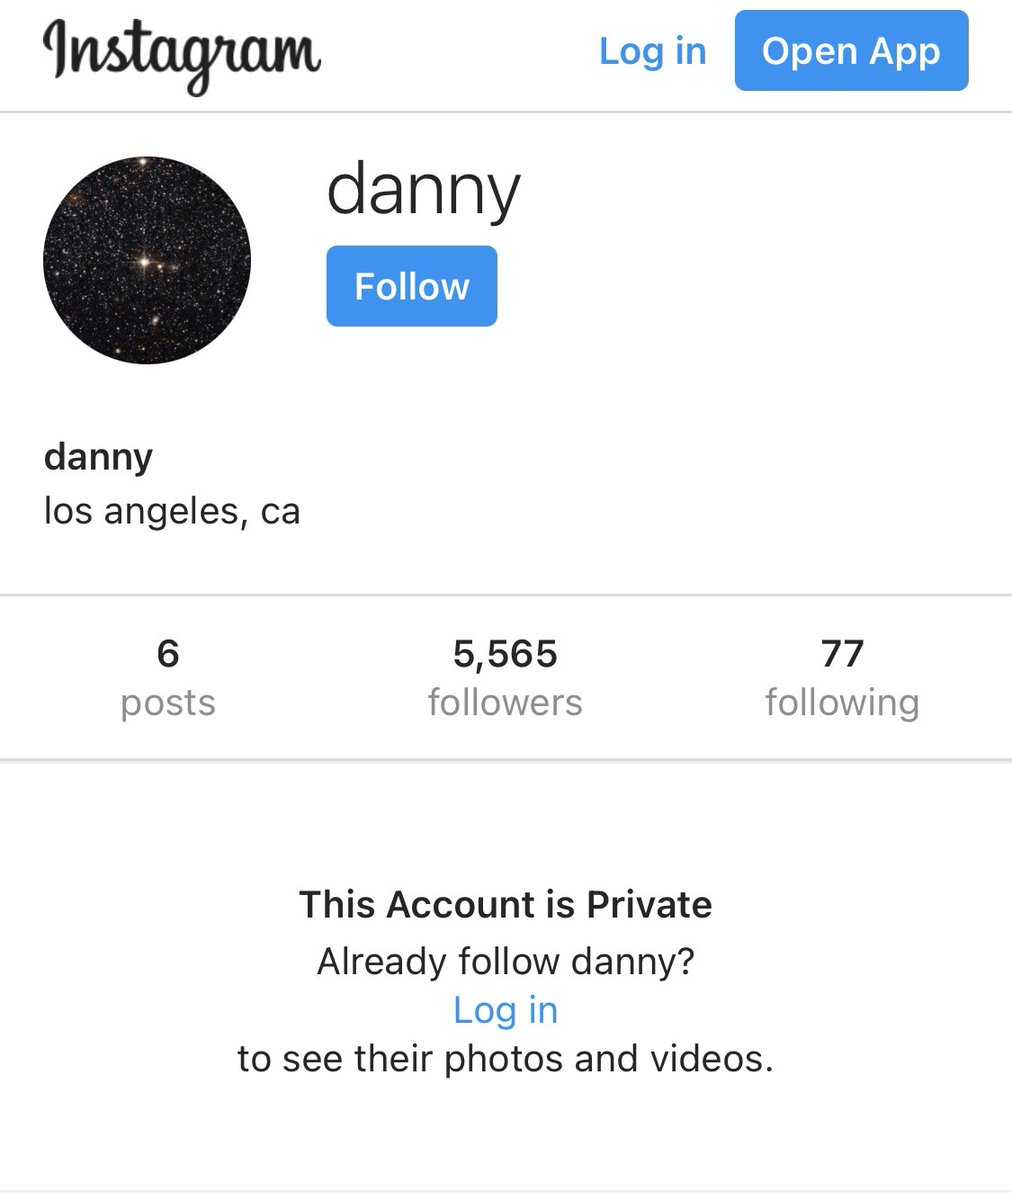 Instagram Log in Open App danny danny los angeles, ca 6 posts 5,565 ers 77 ing This Account is Private Already danny? Log in to see their photos and videos.